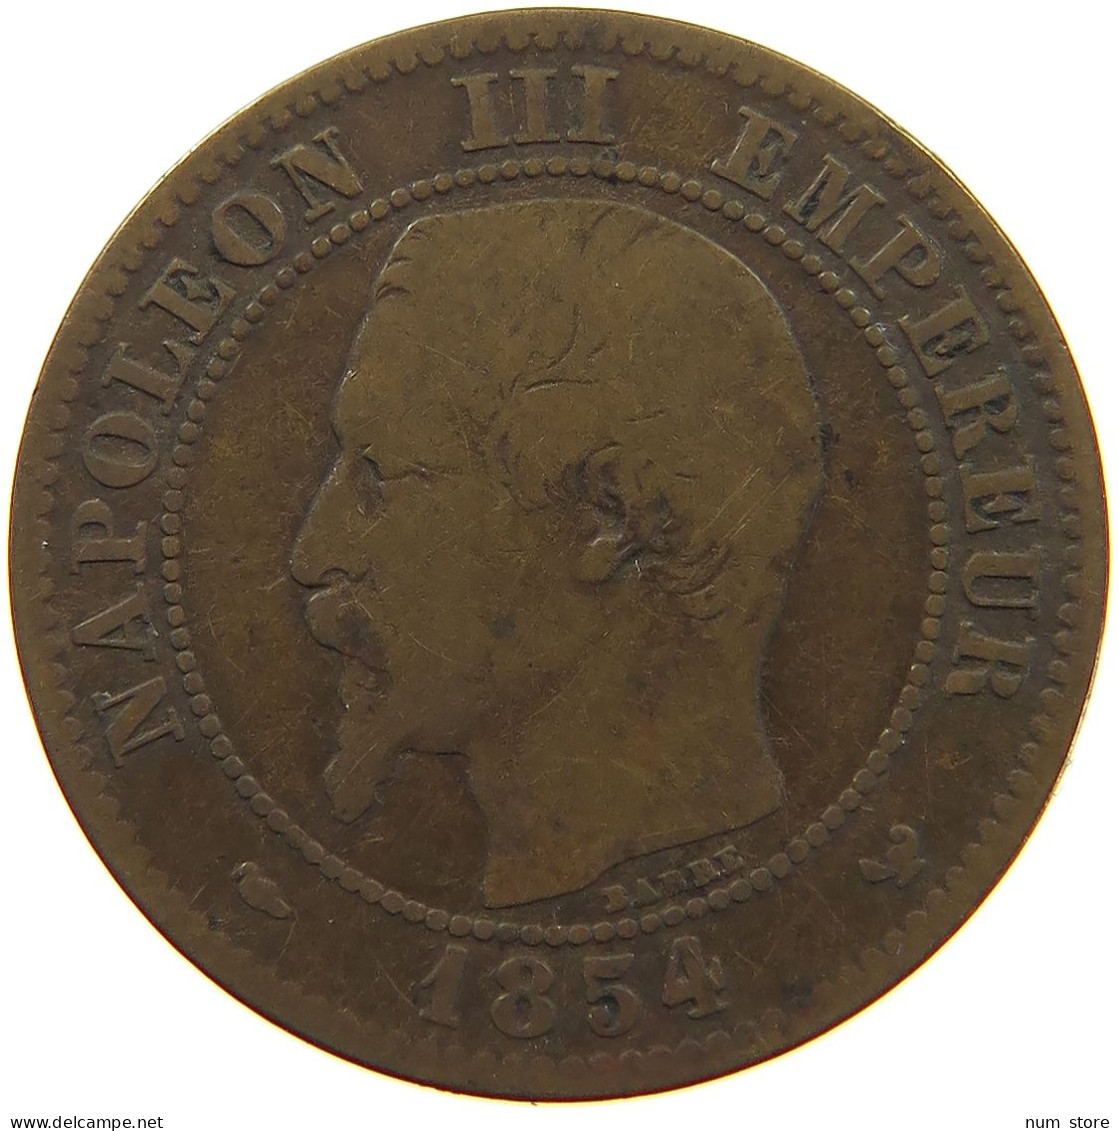 FRANCE 2 CENTIMES 1854 W #a066 0635 - 2 Centimes